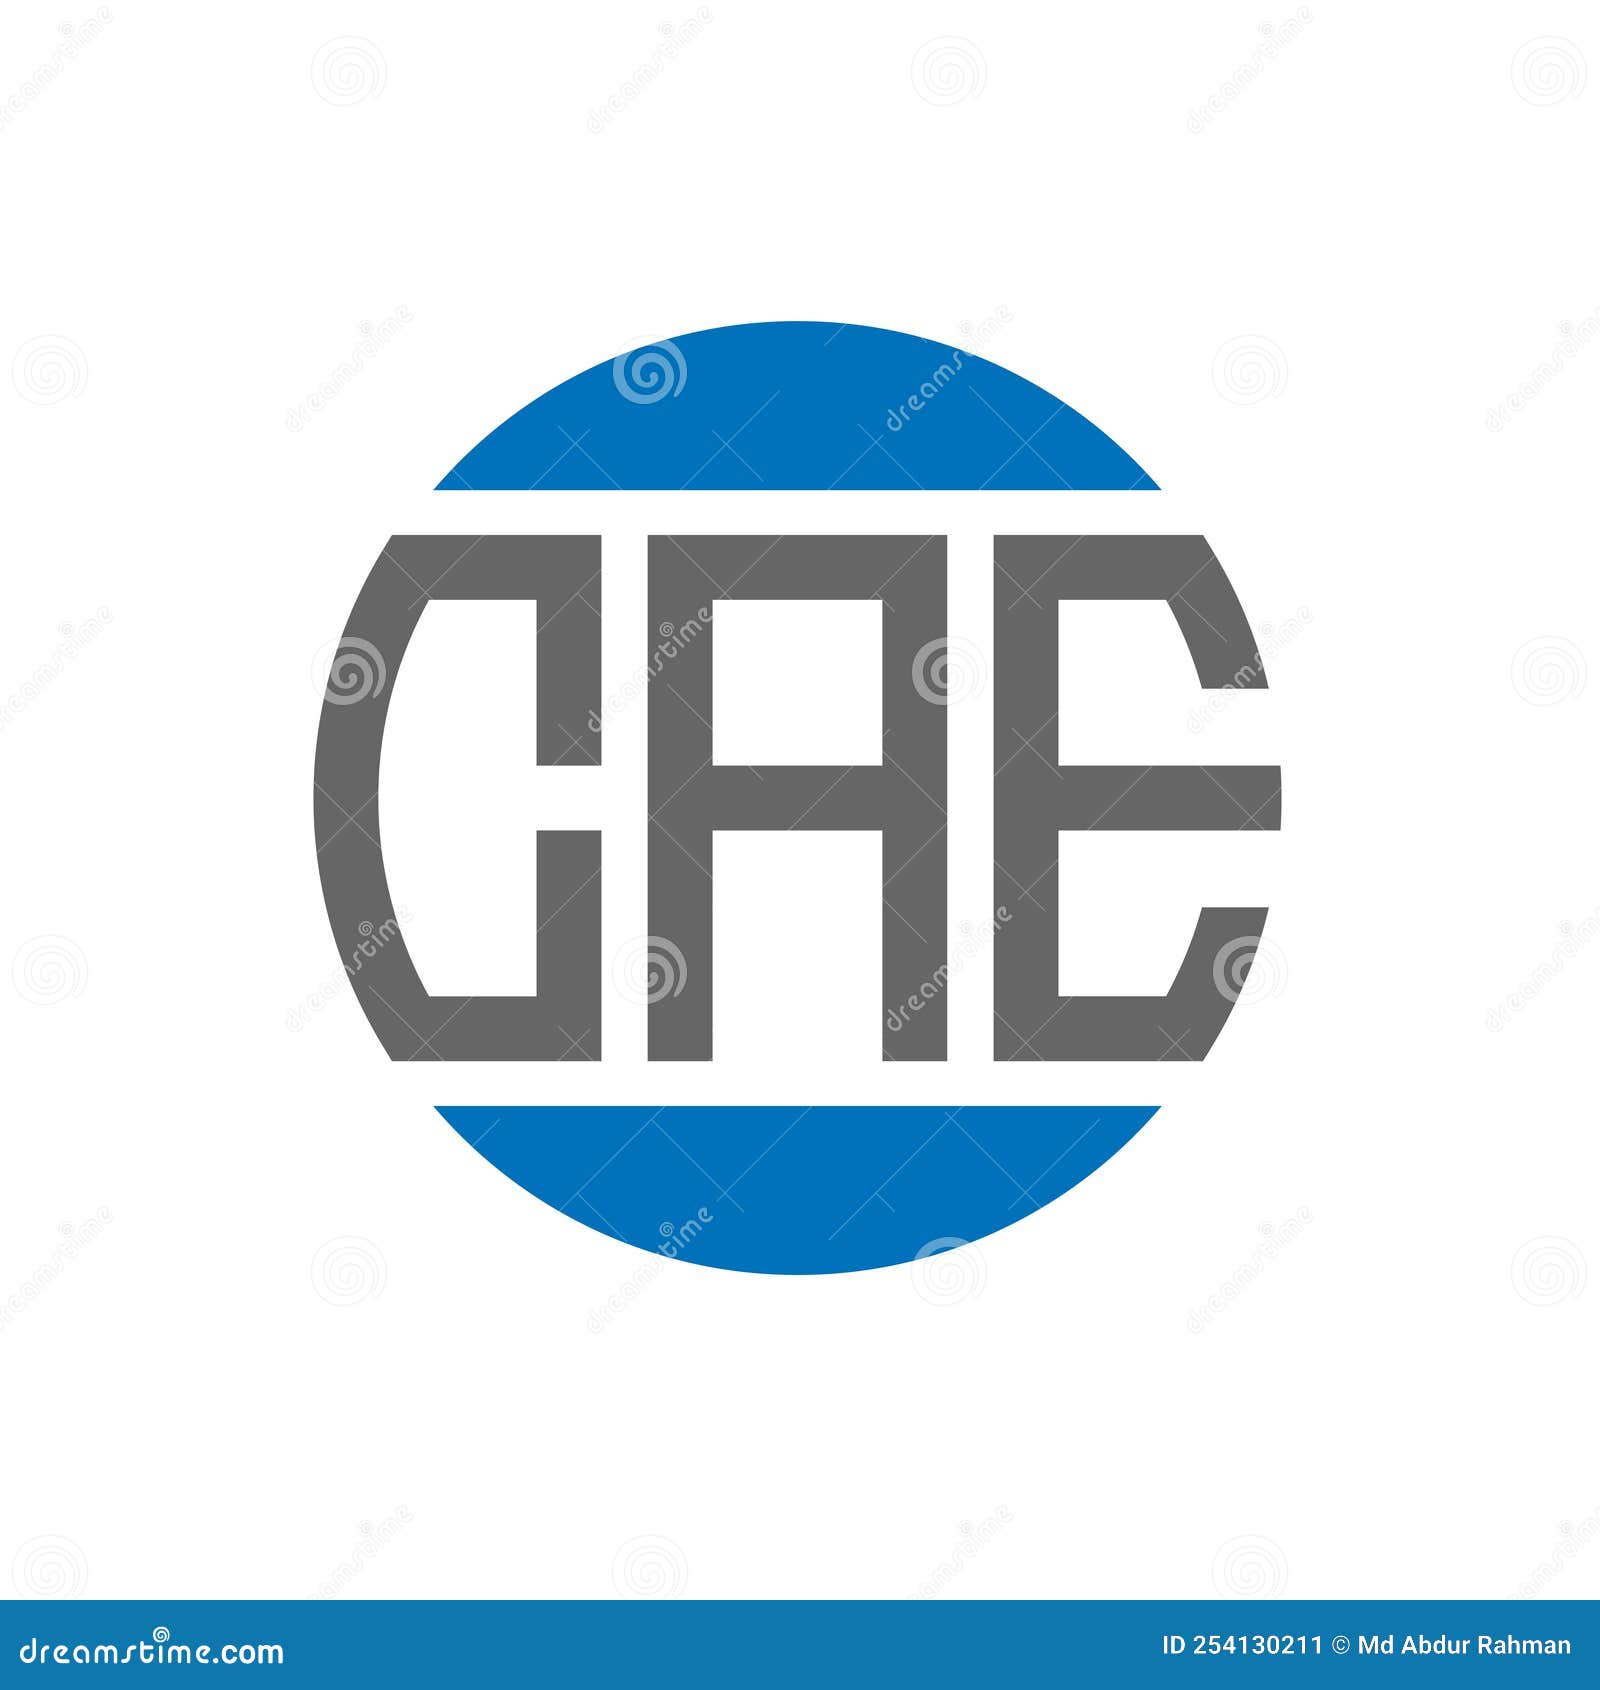 cae letter logo  on white background. cae creative initials circle logo concept